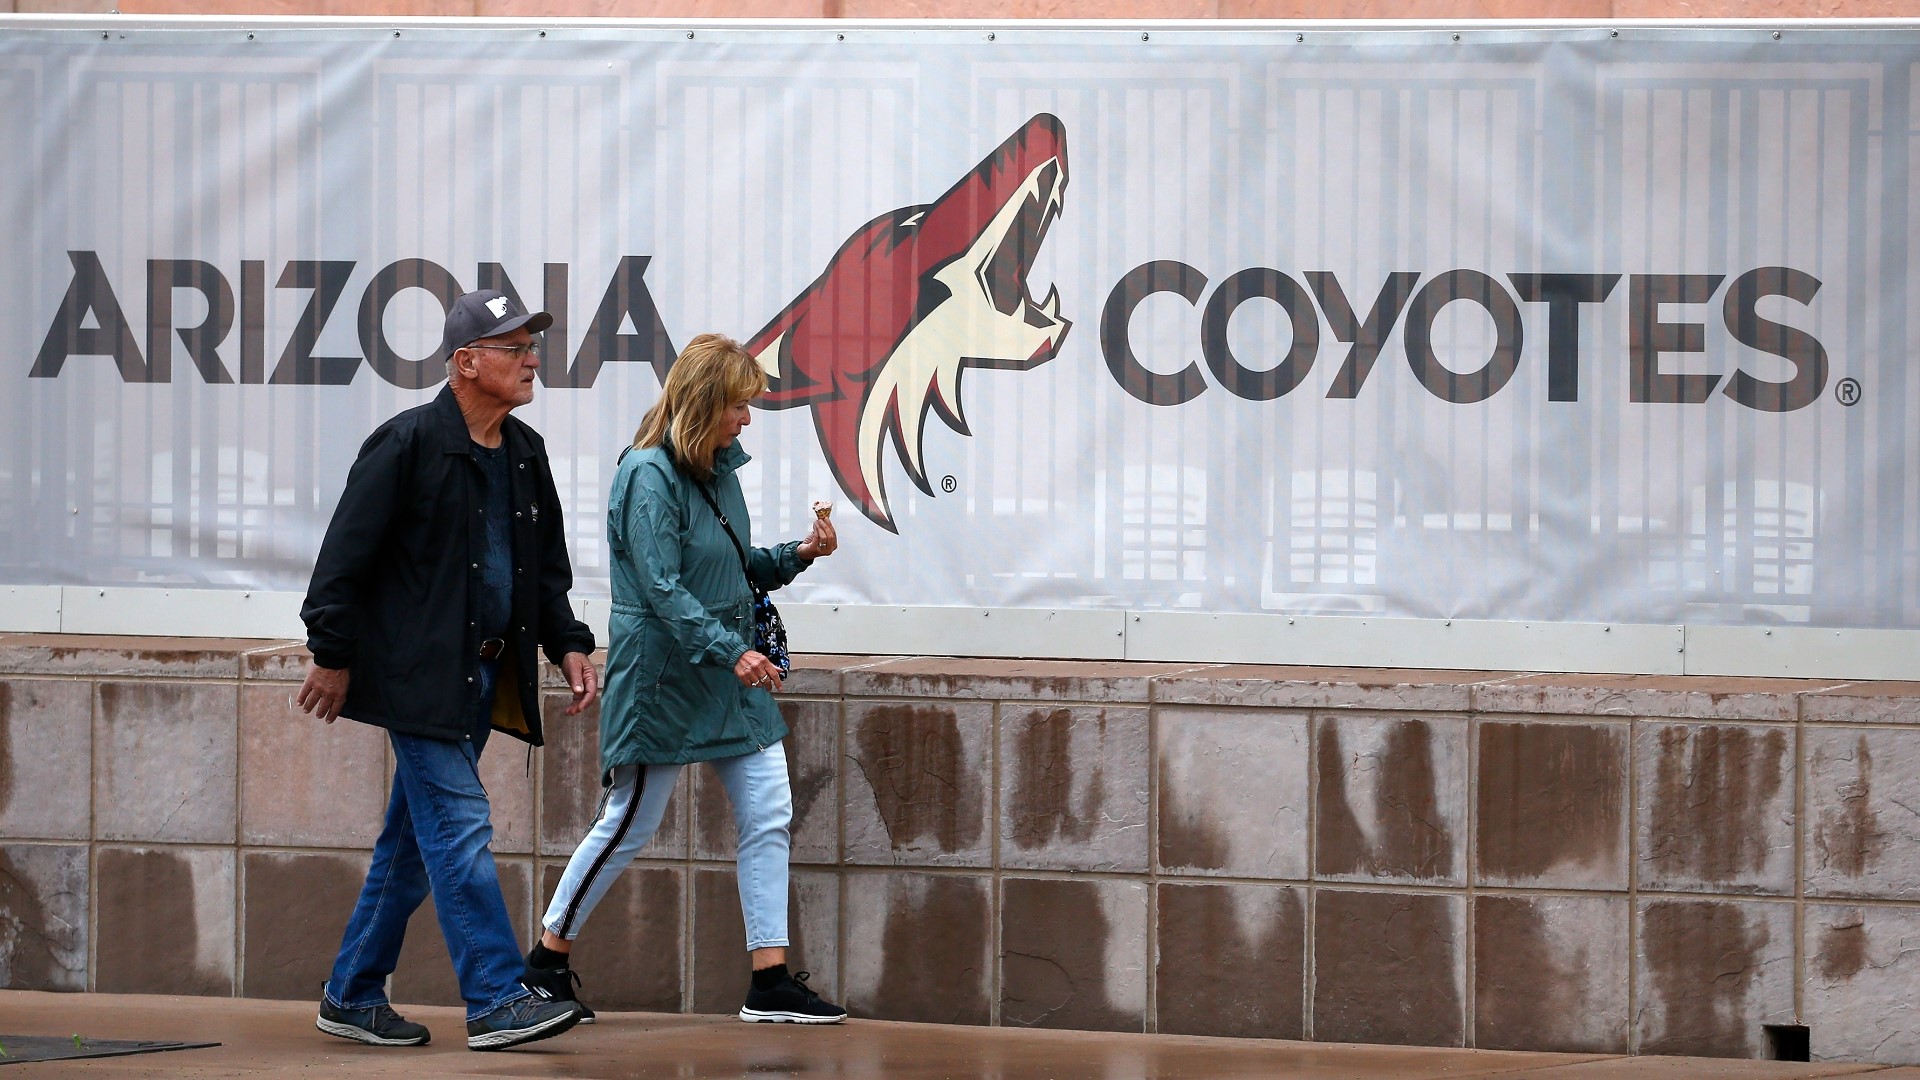 The Arizona Coyotes will need to find a new home after the city of Glendale chose to not renew an agreement to house the hockey team at Gila River Arena.